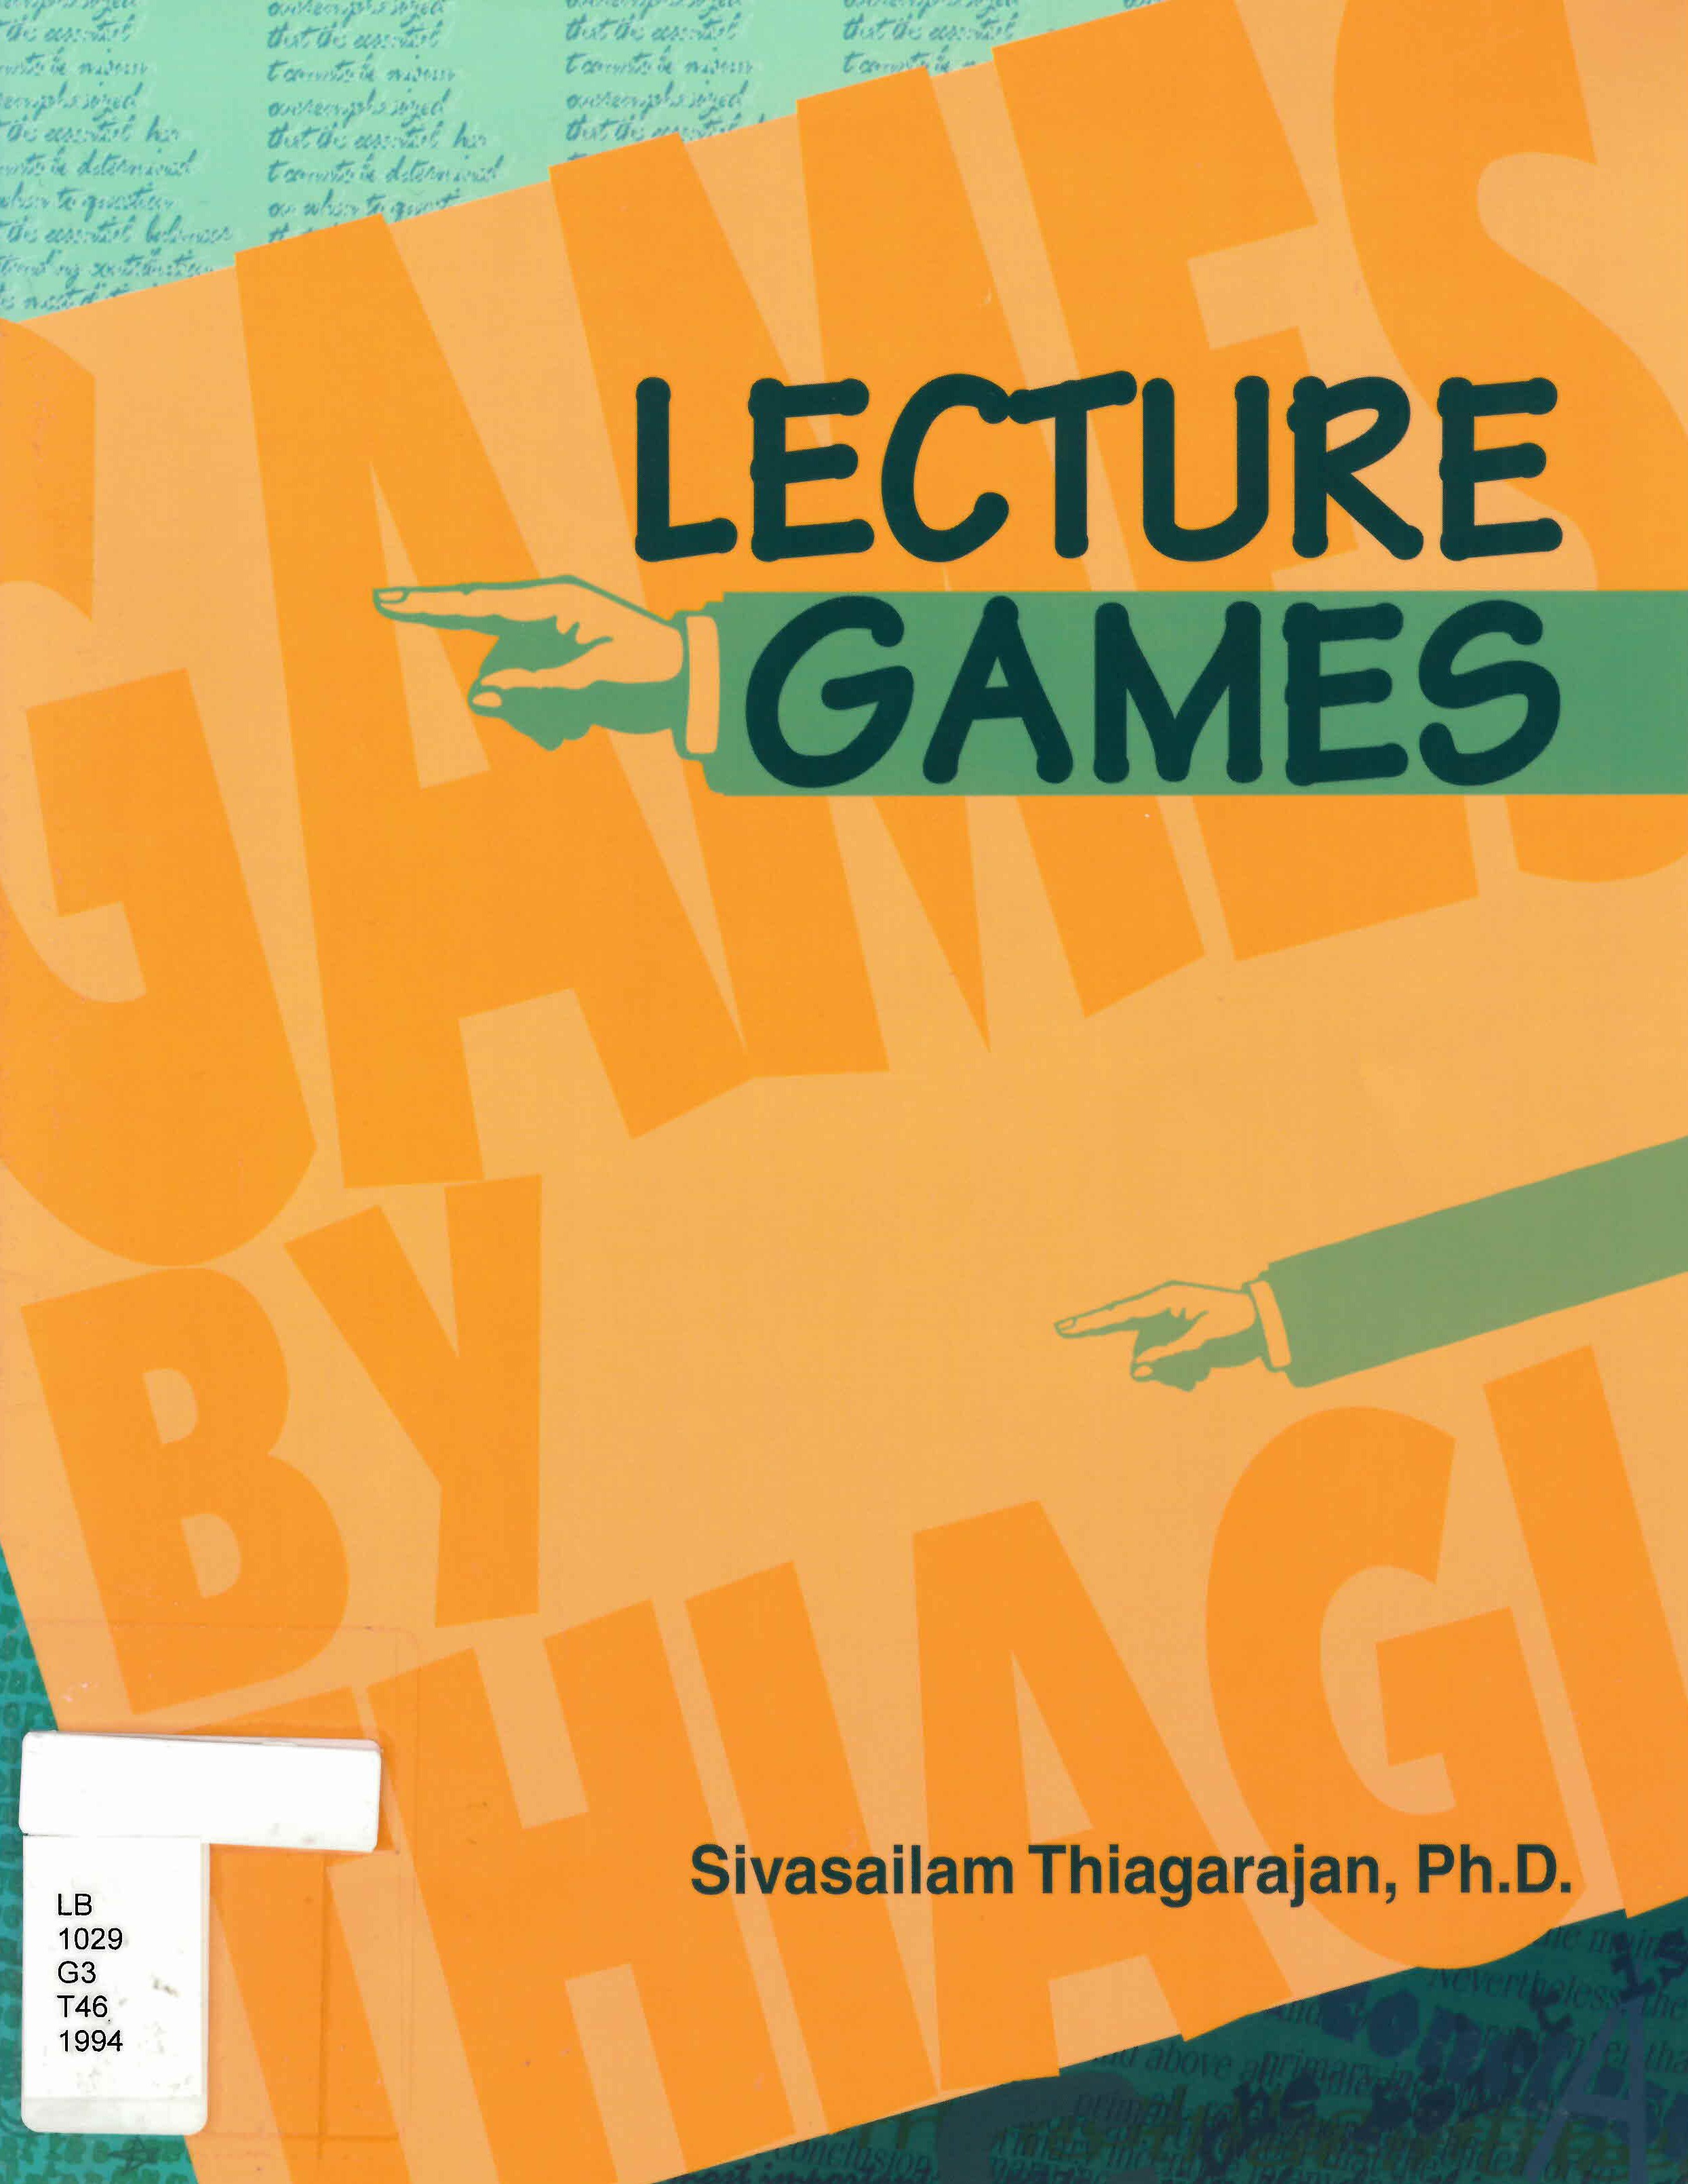 Lecture games : from passive presentations to interactive instruction